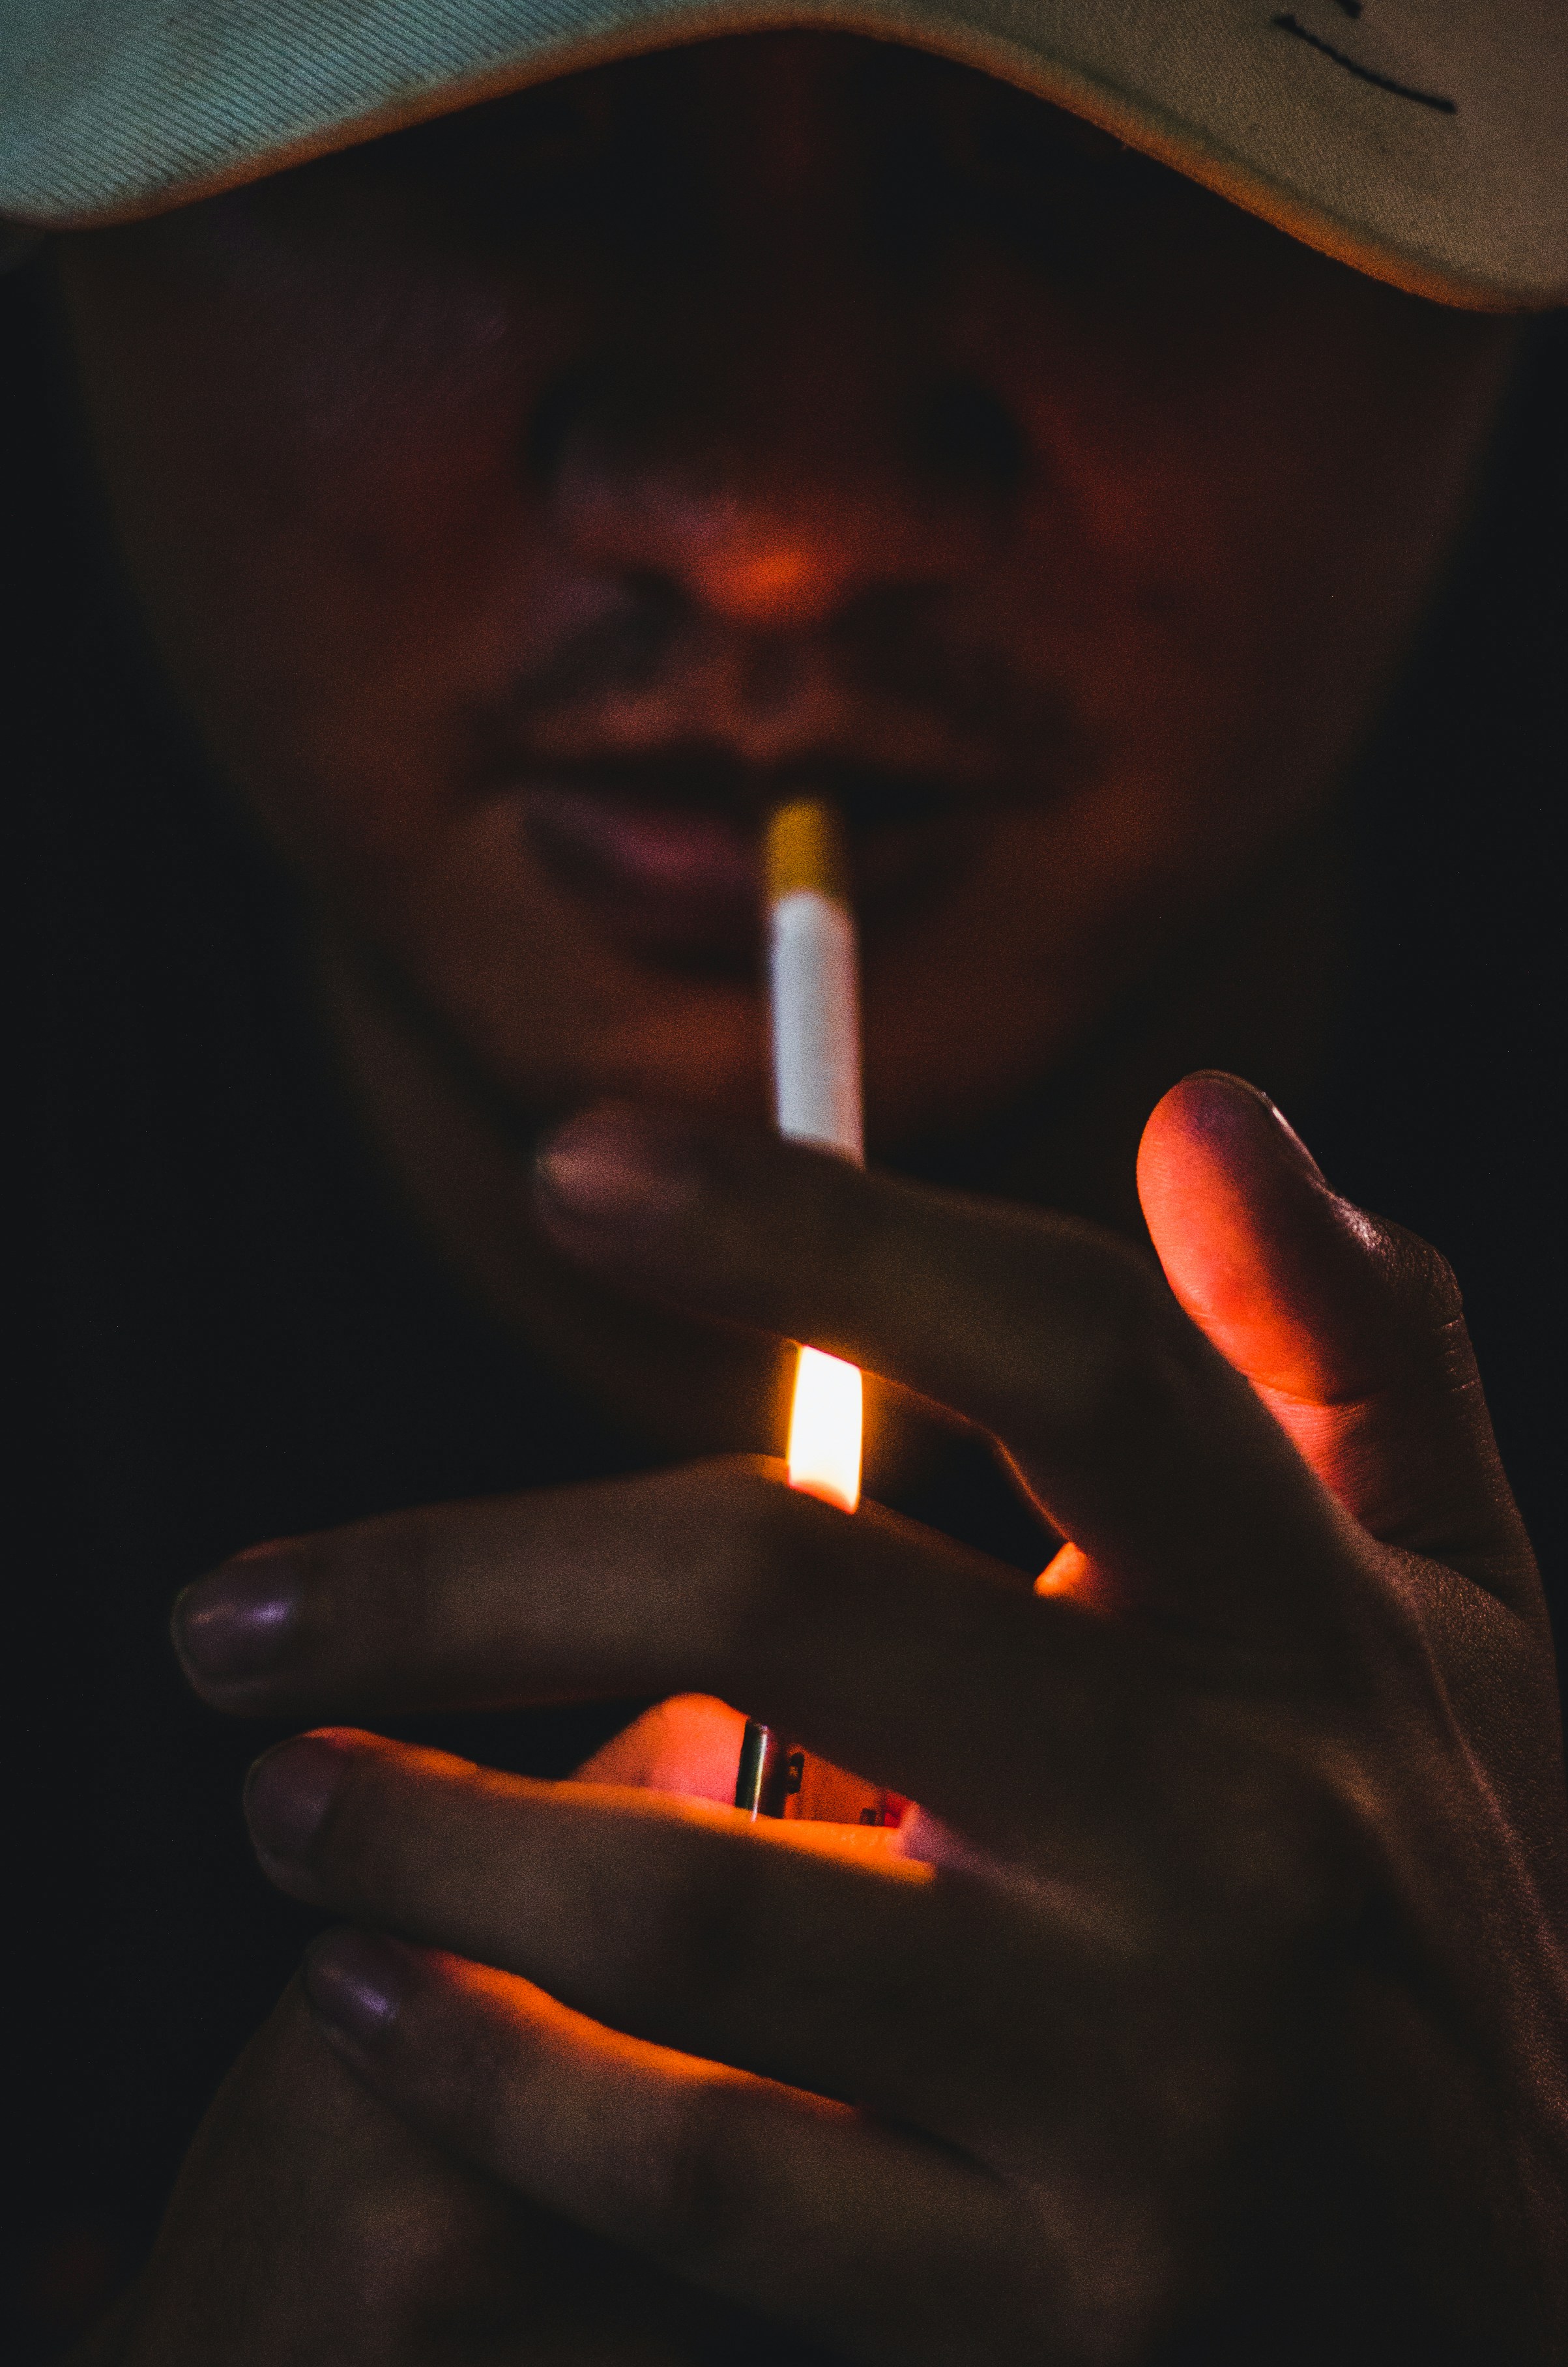 Smokers' lifespan is shortened by 10 years.</p>
<p>This image is released under Creative Commons. Feel free to use and please credit Diamond Rehab Thailand, linking the credit through to https://diamondrehabthailand.com.” style=”max-width:400px;float:left;padding:10px 10px 10px 0px;border:0px;”>Causes:</p>
<p>A number of elements contribute to the introduction of heroin addiction. One major cause is the rise in the option of cheap and powerful heroin available in the market. This enables individuals to try out the medication and finally get into a cycle of addiction. Furthermore, individuals with a brief history of other drug abuse, particularly prescription opioids, are more at risk of building a heroin addiction. Socioeconomic factors, including impoverishment and not enough use of training and resources, in addition perform a substantial part in fueling addiction.</p>
<p>Impact and effects:</p>
<p>Heroin addiction has far-reaching effects on individuals, families, and communities. Bodily, it presents serious health risks, including respiratory despair, folded veins, and organ harm. The possibility of overdose is also notably greater with heroin use. Psychologically, addiction to heroin can cause severe despair, anxiety, and alterations in personality, usually pushing people into a situation of continual frustration.</p>
<p>The ripple ramifications of heroin addiction extend to households and communities. Connections come to be tense, trust is eroded, and support methods disintegrate. People usually endure financial hardships as they attempt to secure pricey rehabilitation treatments. In communities affected by heroin addiction, crime rates tend to increase, as people turn to unlawful tasks to invest in their particular addiction.</p>
<p>Treatment Options:</p>
<p>Dealing with heroin addiction requires a multifaceted method. Detoxification, the initial step, assists individuals overcome actual reliance on the medicine. Medications such as for instance methadone, buprenorphine, and naltrexone assist in handling detachment symptoms, decreasing cravings,  <a href=